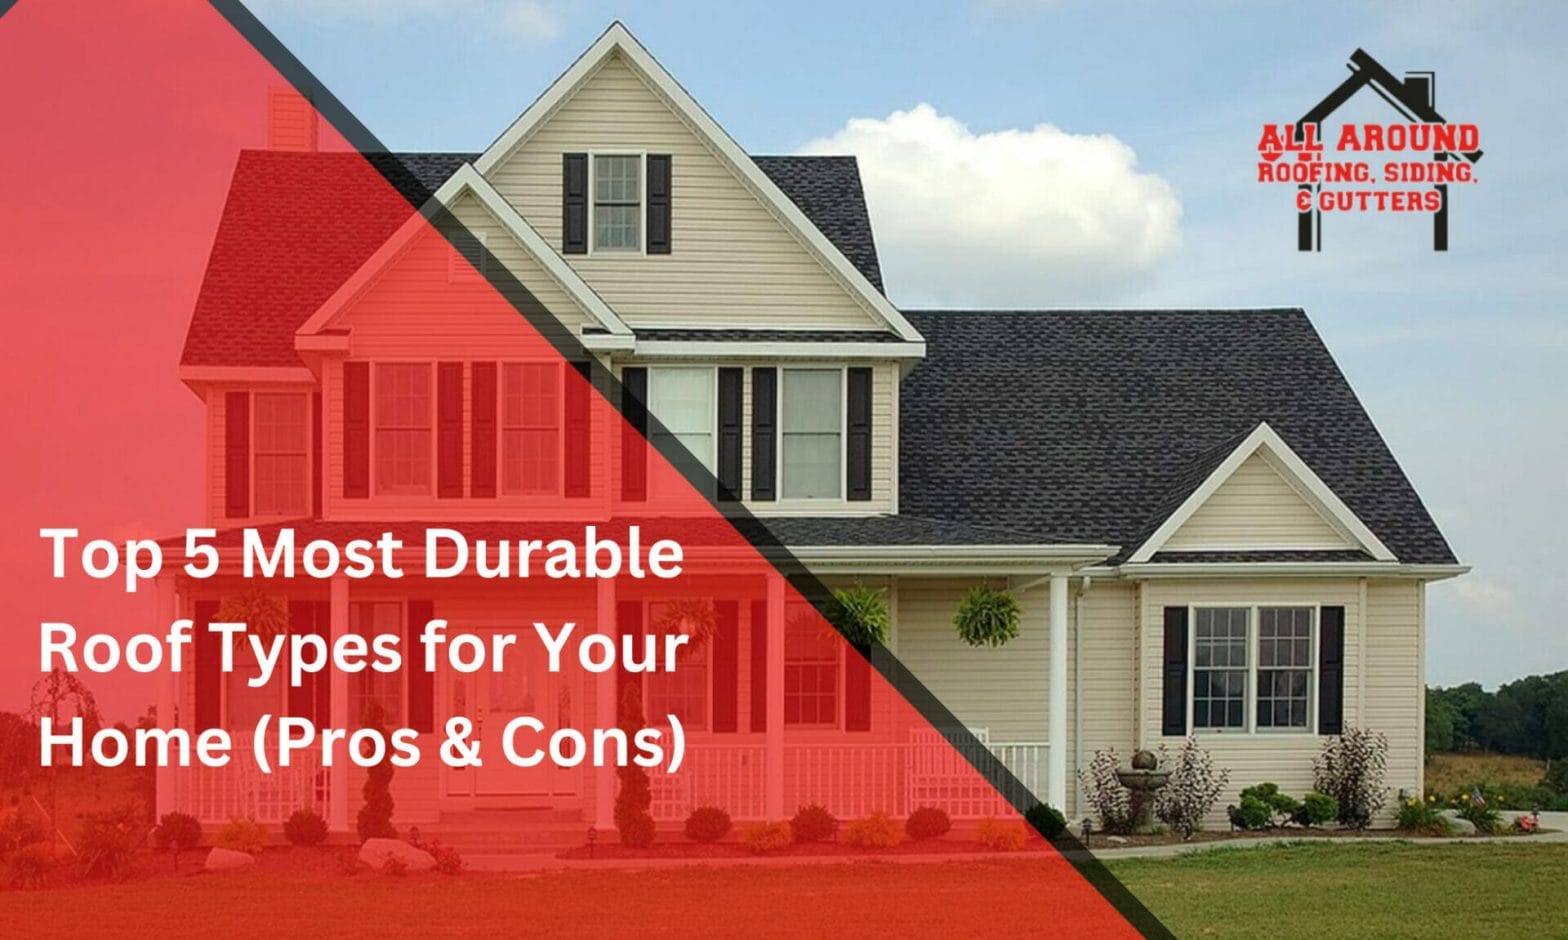 Top 5 Most Durable Roof Types for Your Home (Pros & Cons)